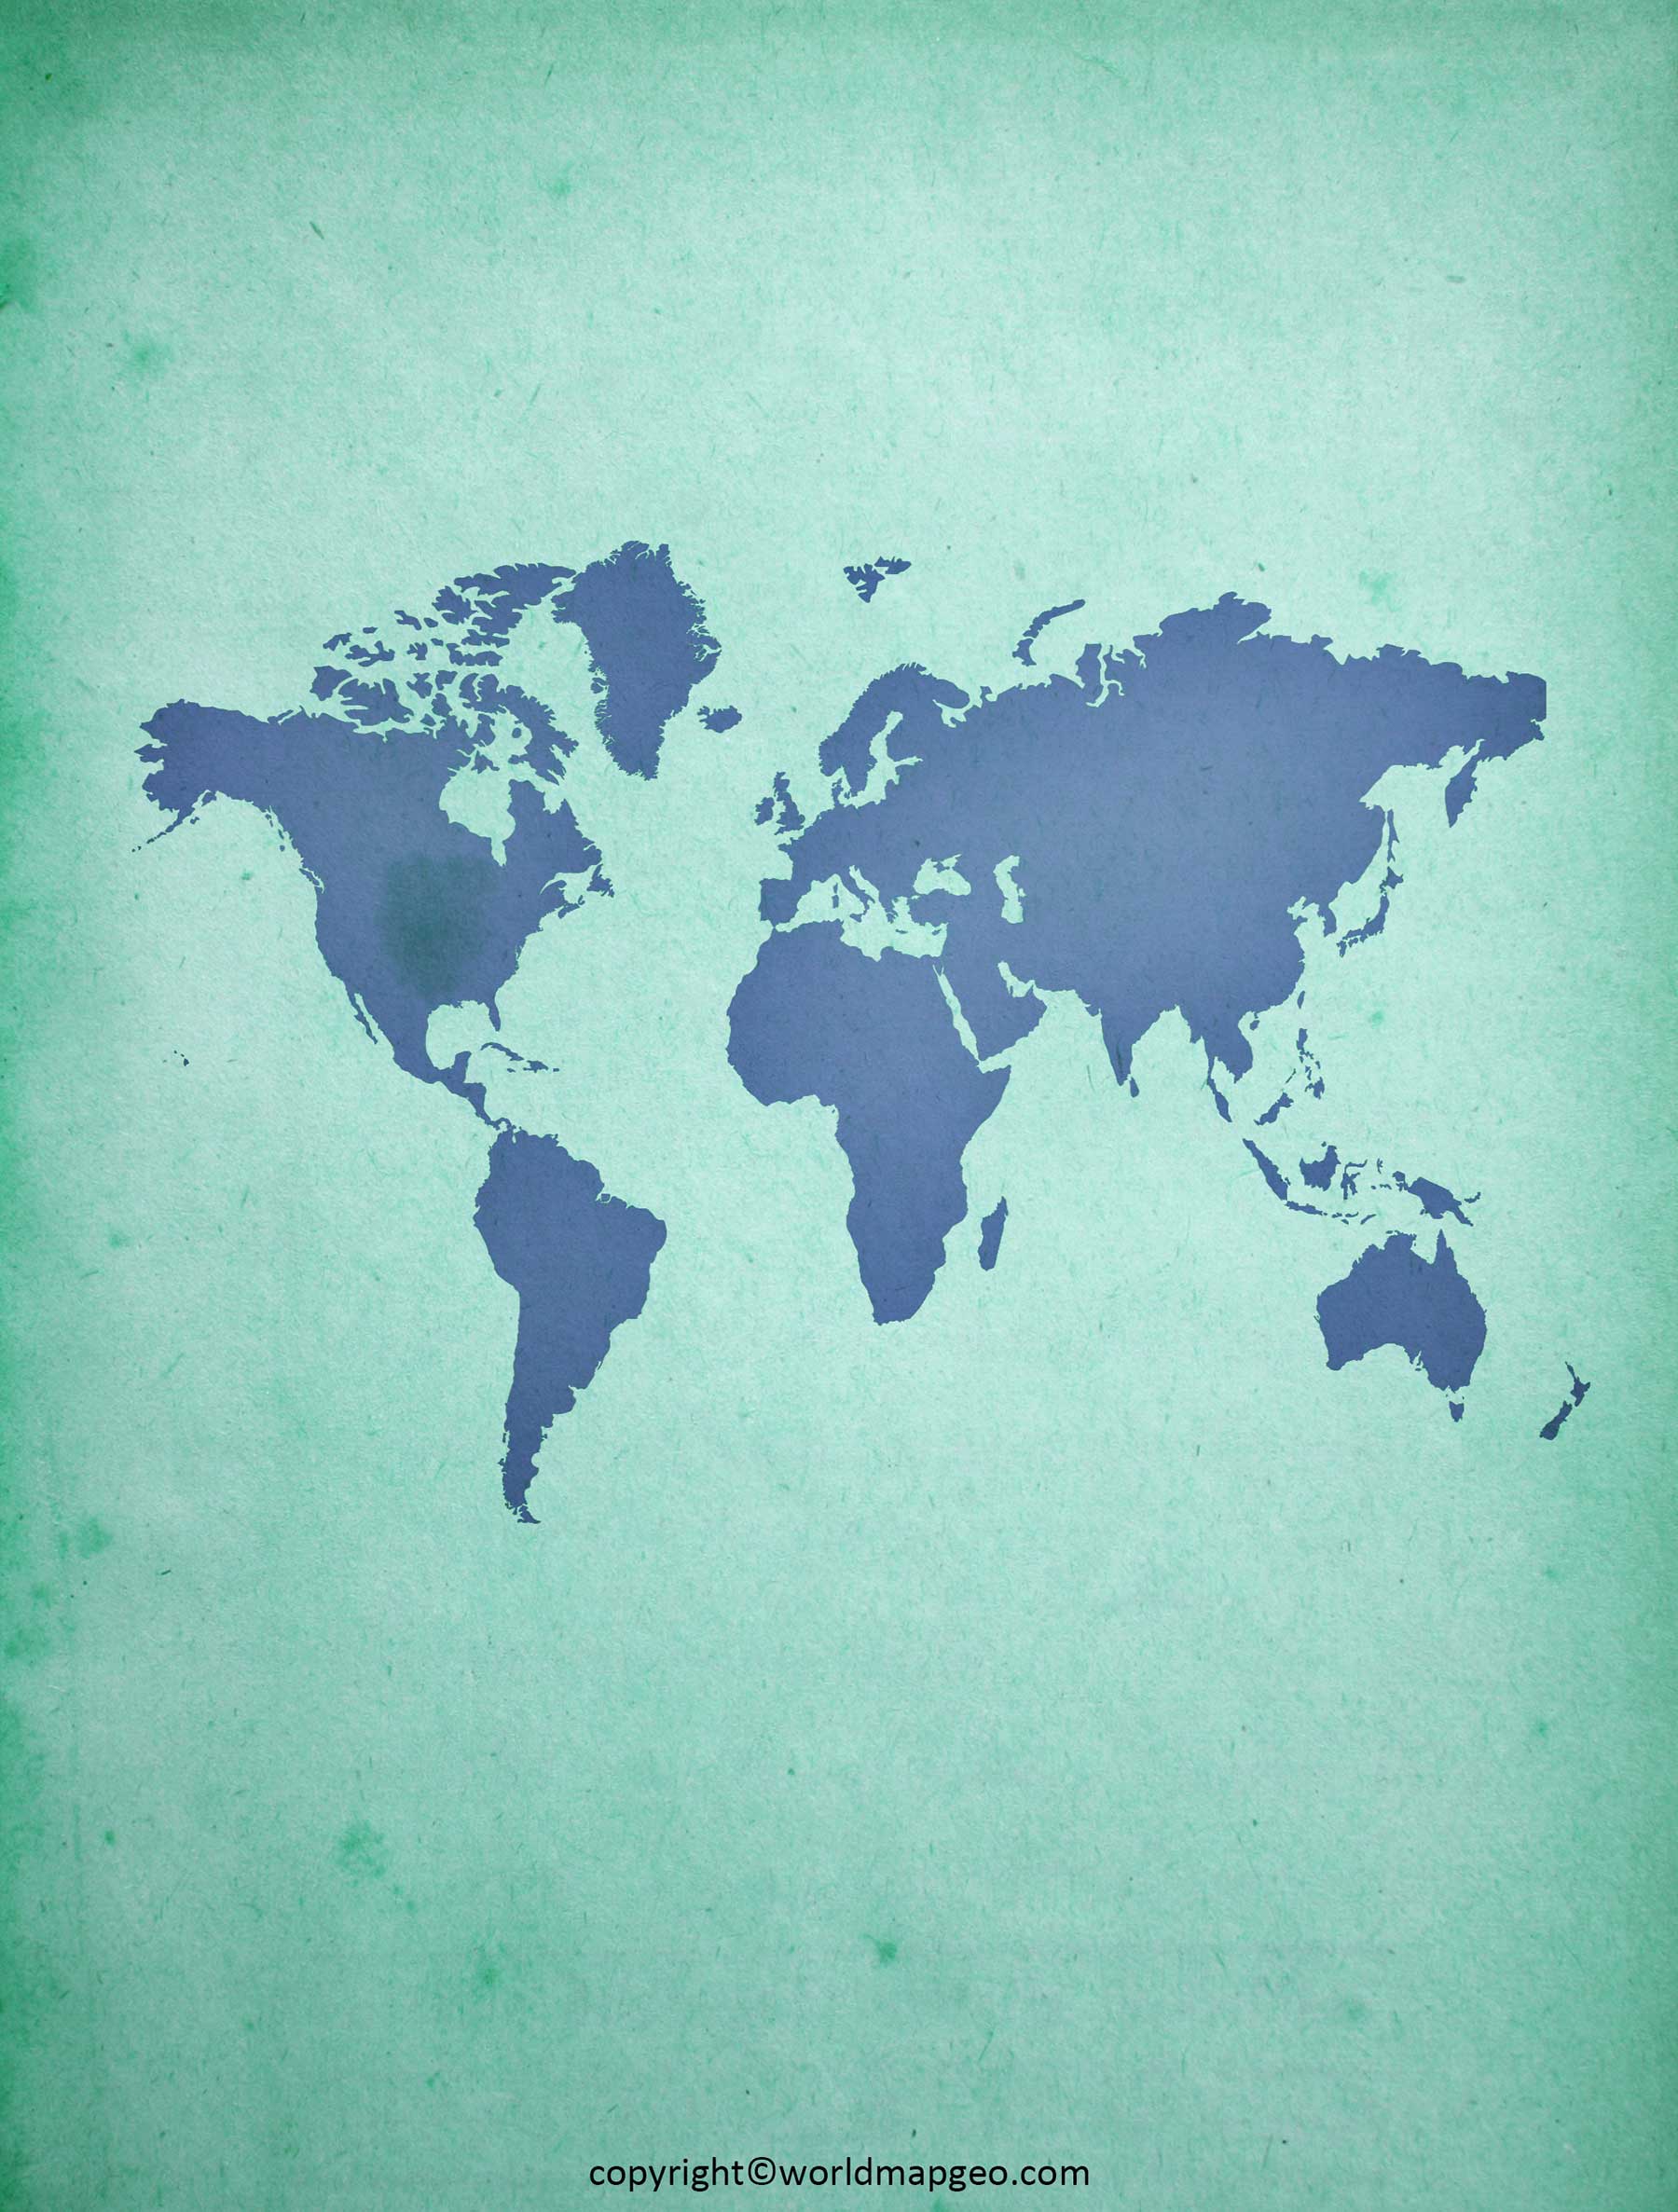 Large World Map HD Poster